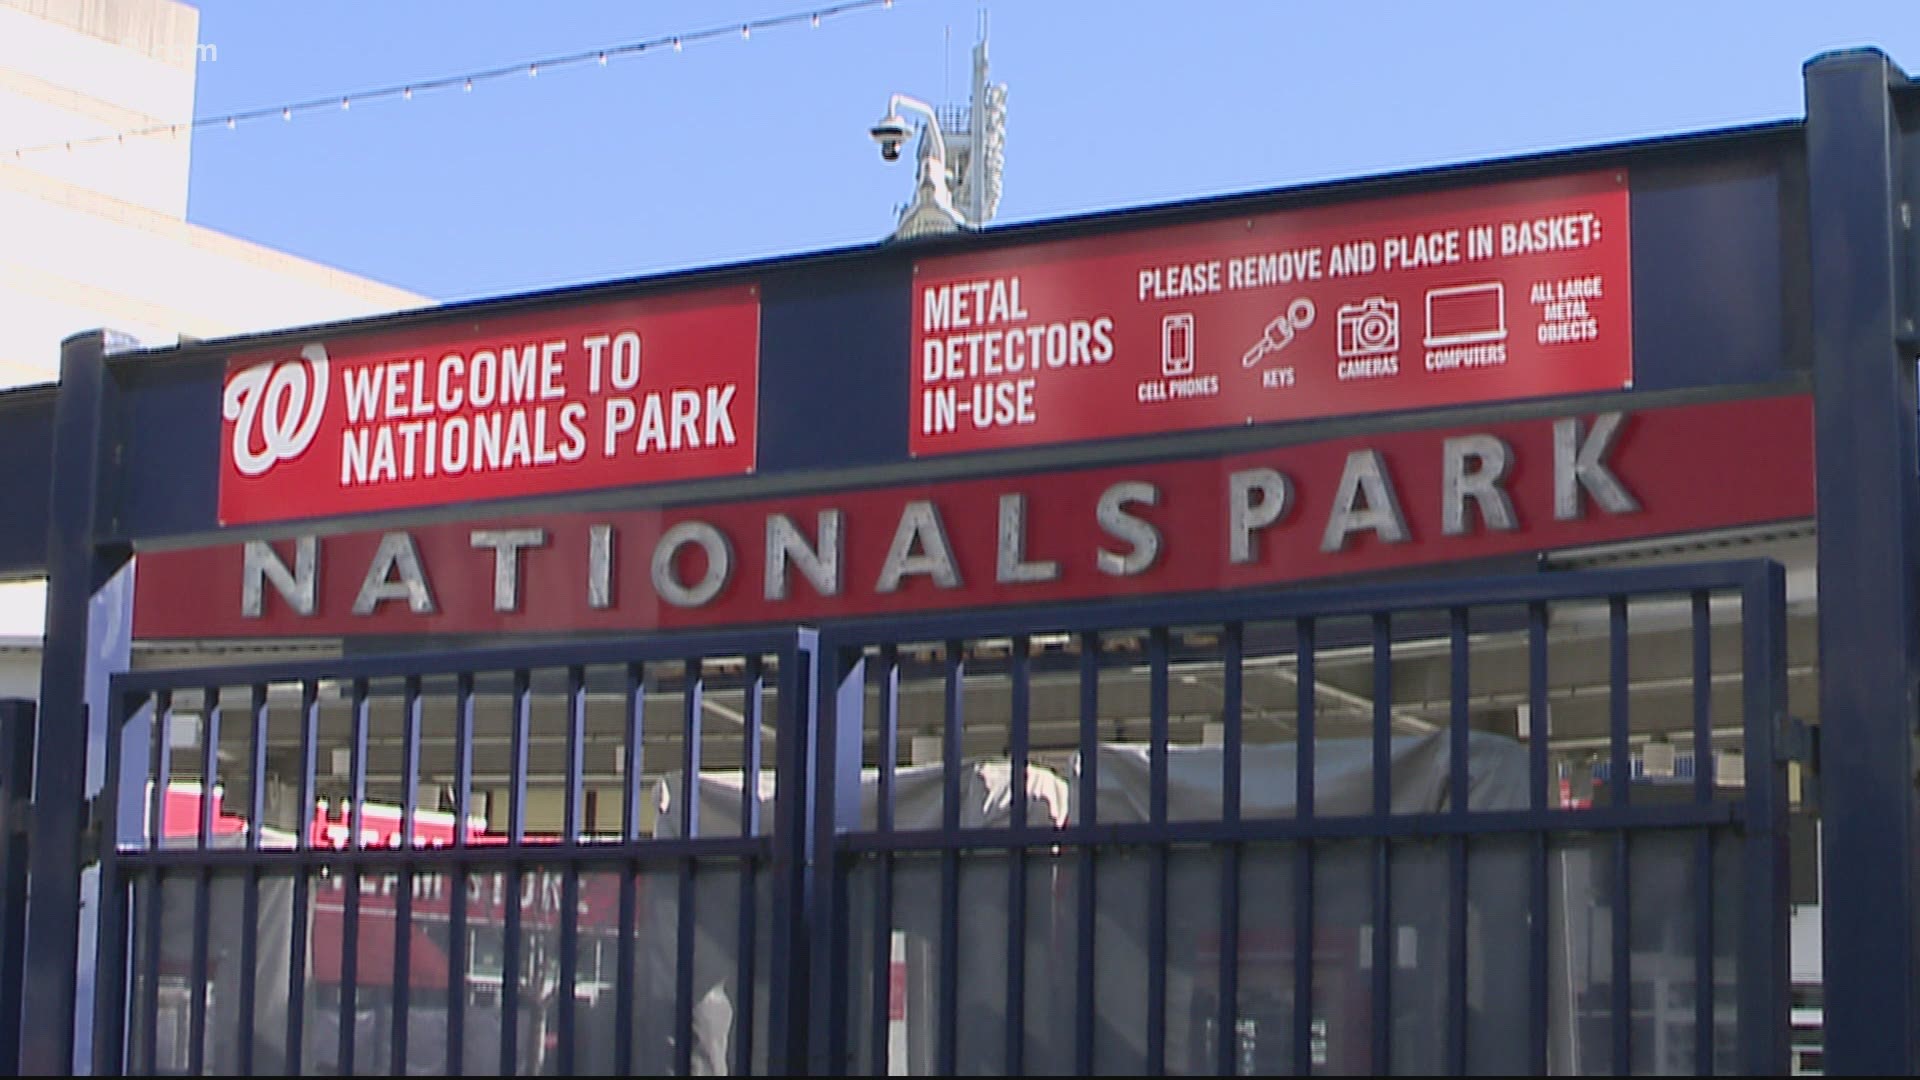 DC Health Director tells Nationals decision to allow fans at games could be reconsidered later this month based on COVID-19 metrics.